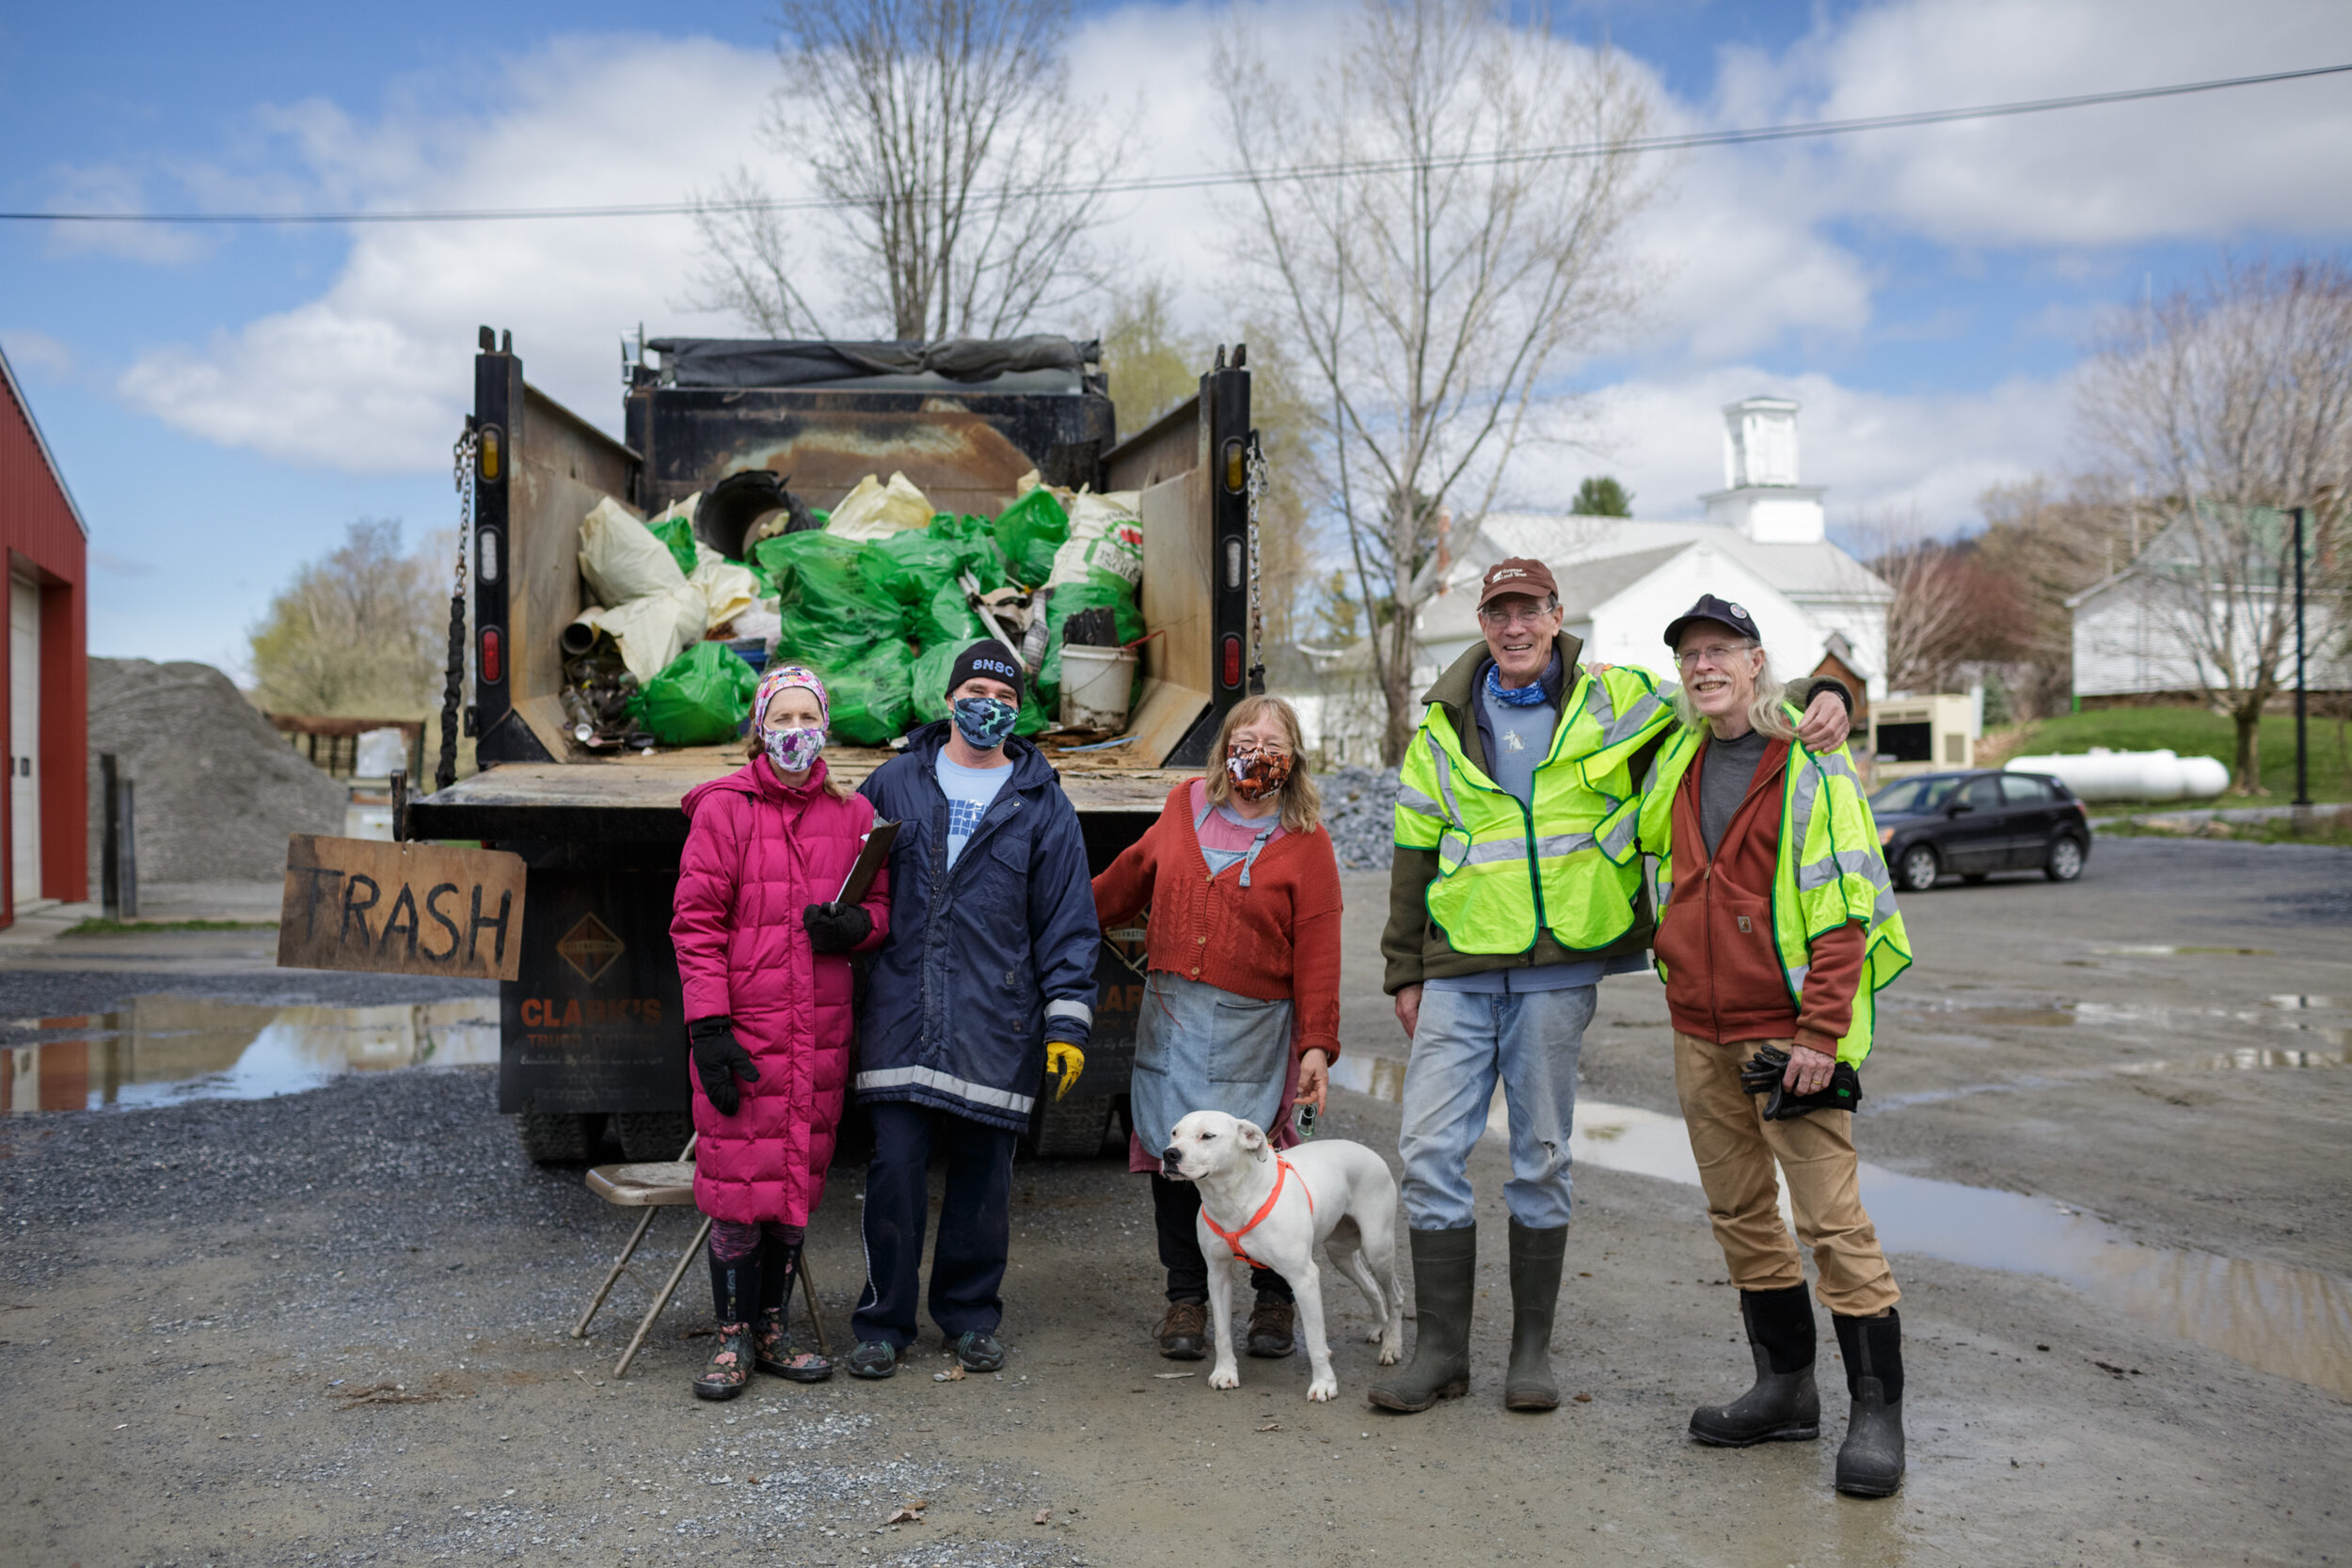 Heather Remy, John Remy, Town Clerk Heidi Racht, Henry R. Carse and Knox Cummin at the Huntington Town Garage green up day trash collection site. Photo by Anna Watts.